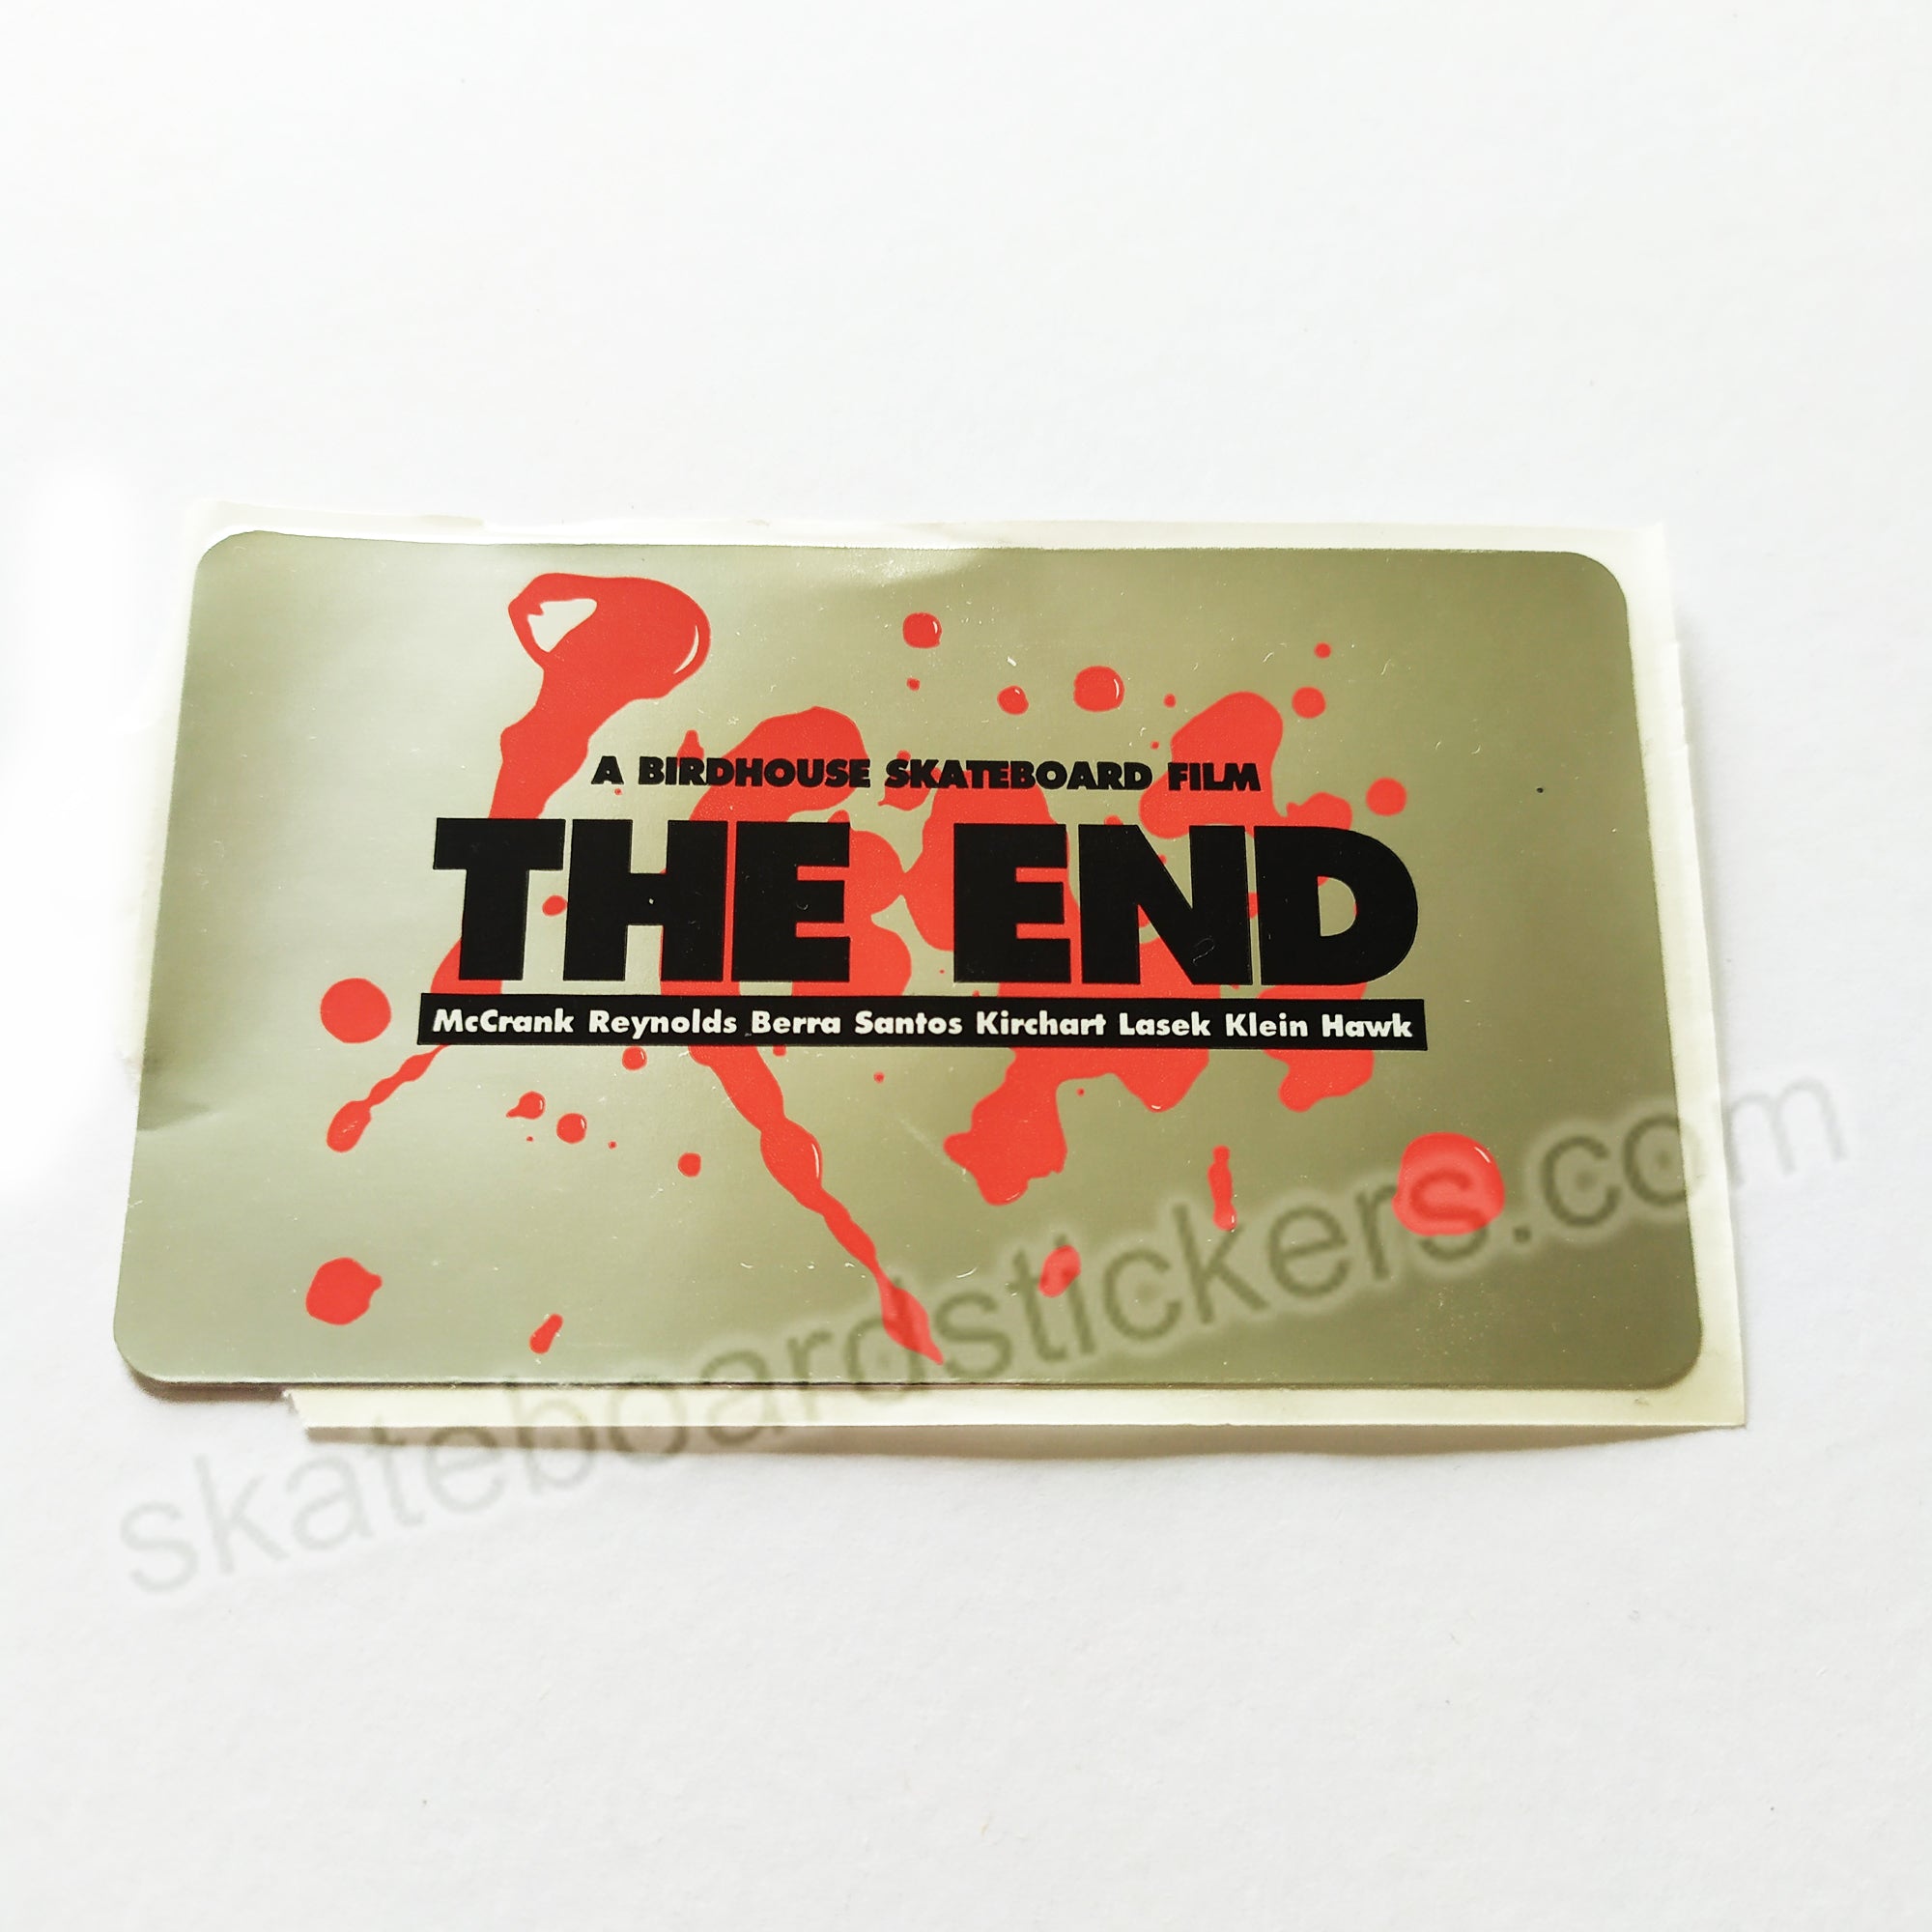 Birdhouse Skateboards "The End" Sticker (actual video label!)